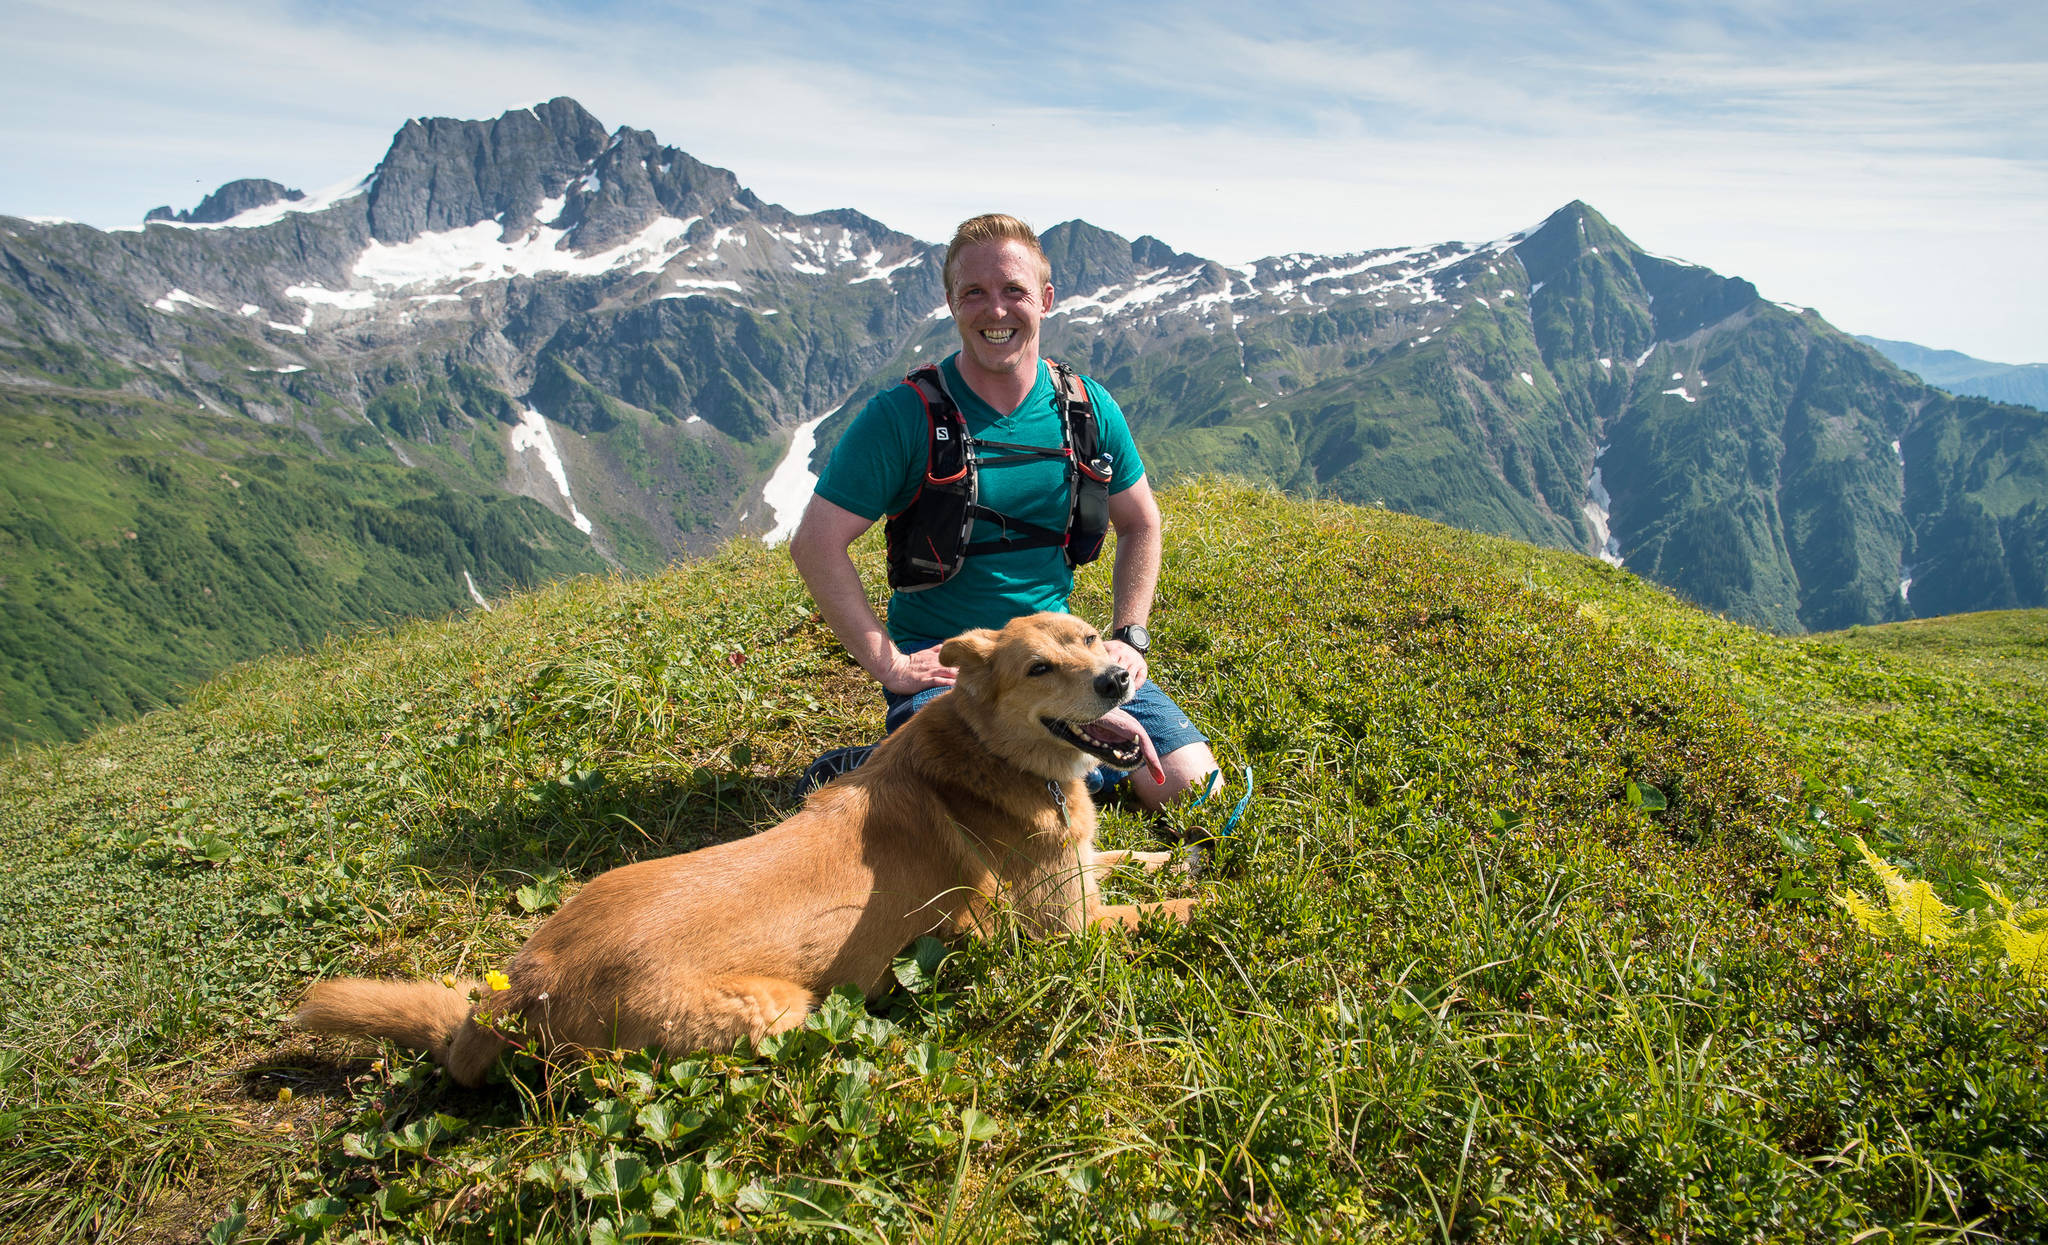 Against a backdrop of Stoller White Mountain, left, and Mount McGinnis, ultramarathon runner Houston Laws poses with Sadie during a run up Grandchild Peak on Thursday, August 10, 2017. (Michael Penn | Juneau Empire)